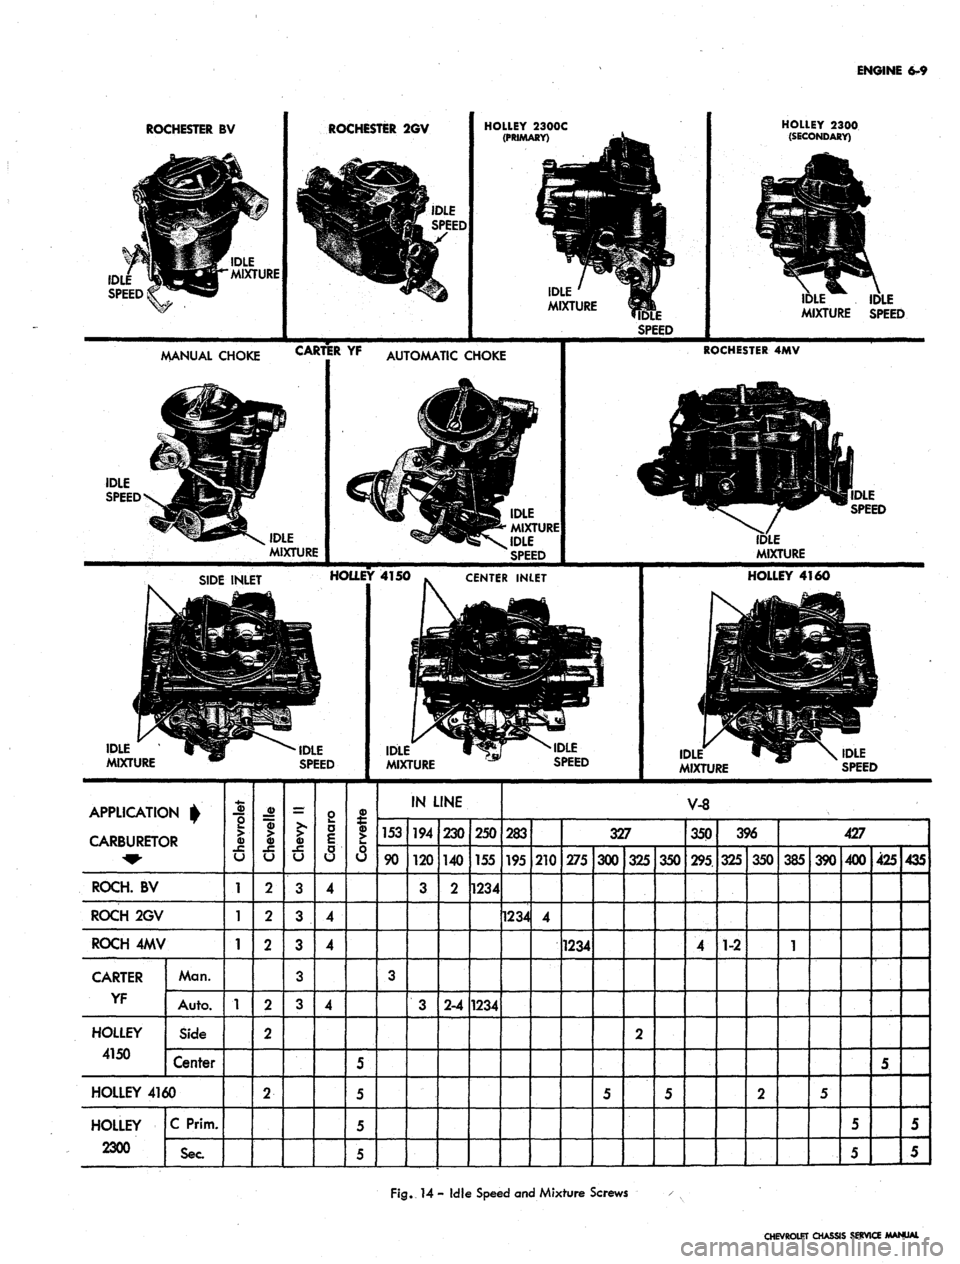 CHEVROLET CAMARO 1967 1.G Chassis Repair Manual 
ENGINE
 6-9

ROCHESTER
 BV

IDLE

MIXTURE 
ROCHESTER
 2GV 
HOLLEY 2300C

(PRIMARY)

IDLE

MIXTURE

SPEED 
HOLLEY 2300

(SECONDARY)

LE IDLE

MIXTURE SPEED

MANUAL CHOKE 
CARTER
 YF

IDLE

MIXTURE 
AU